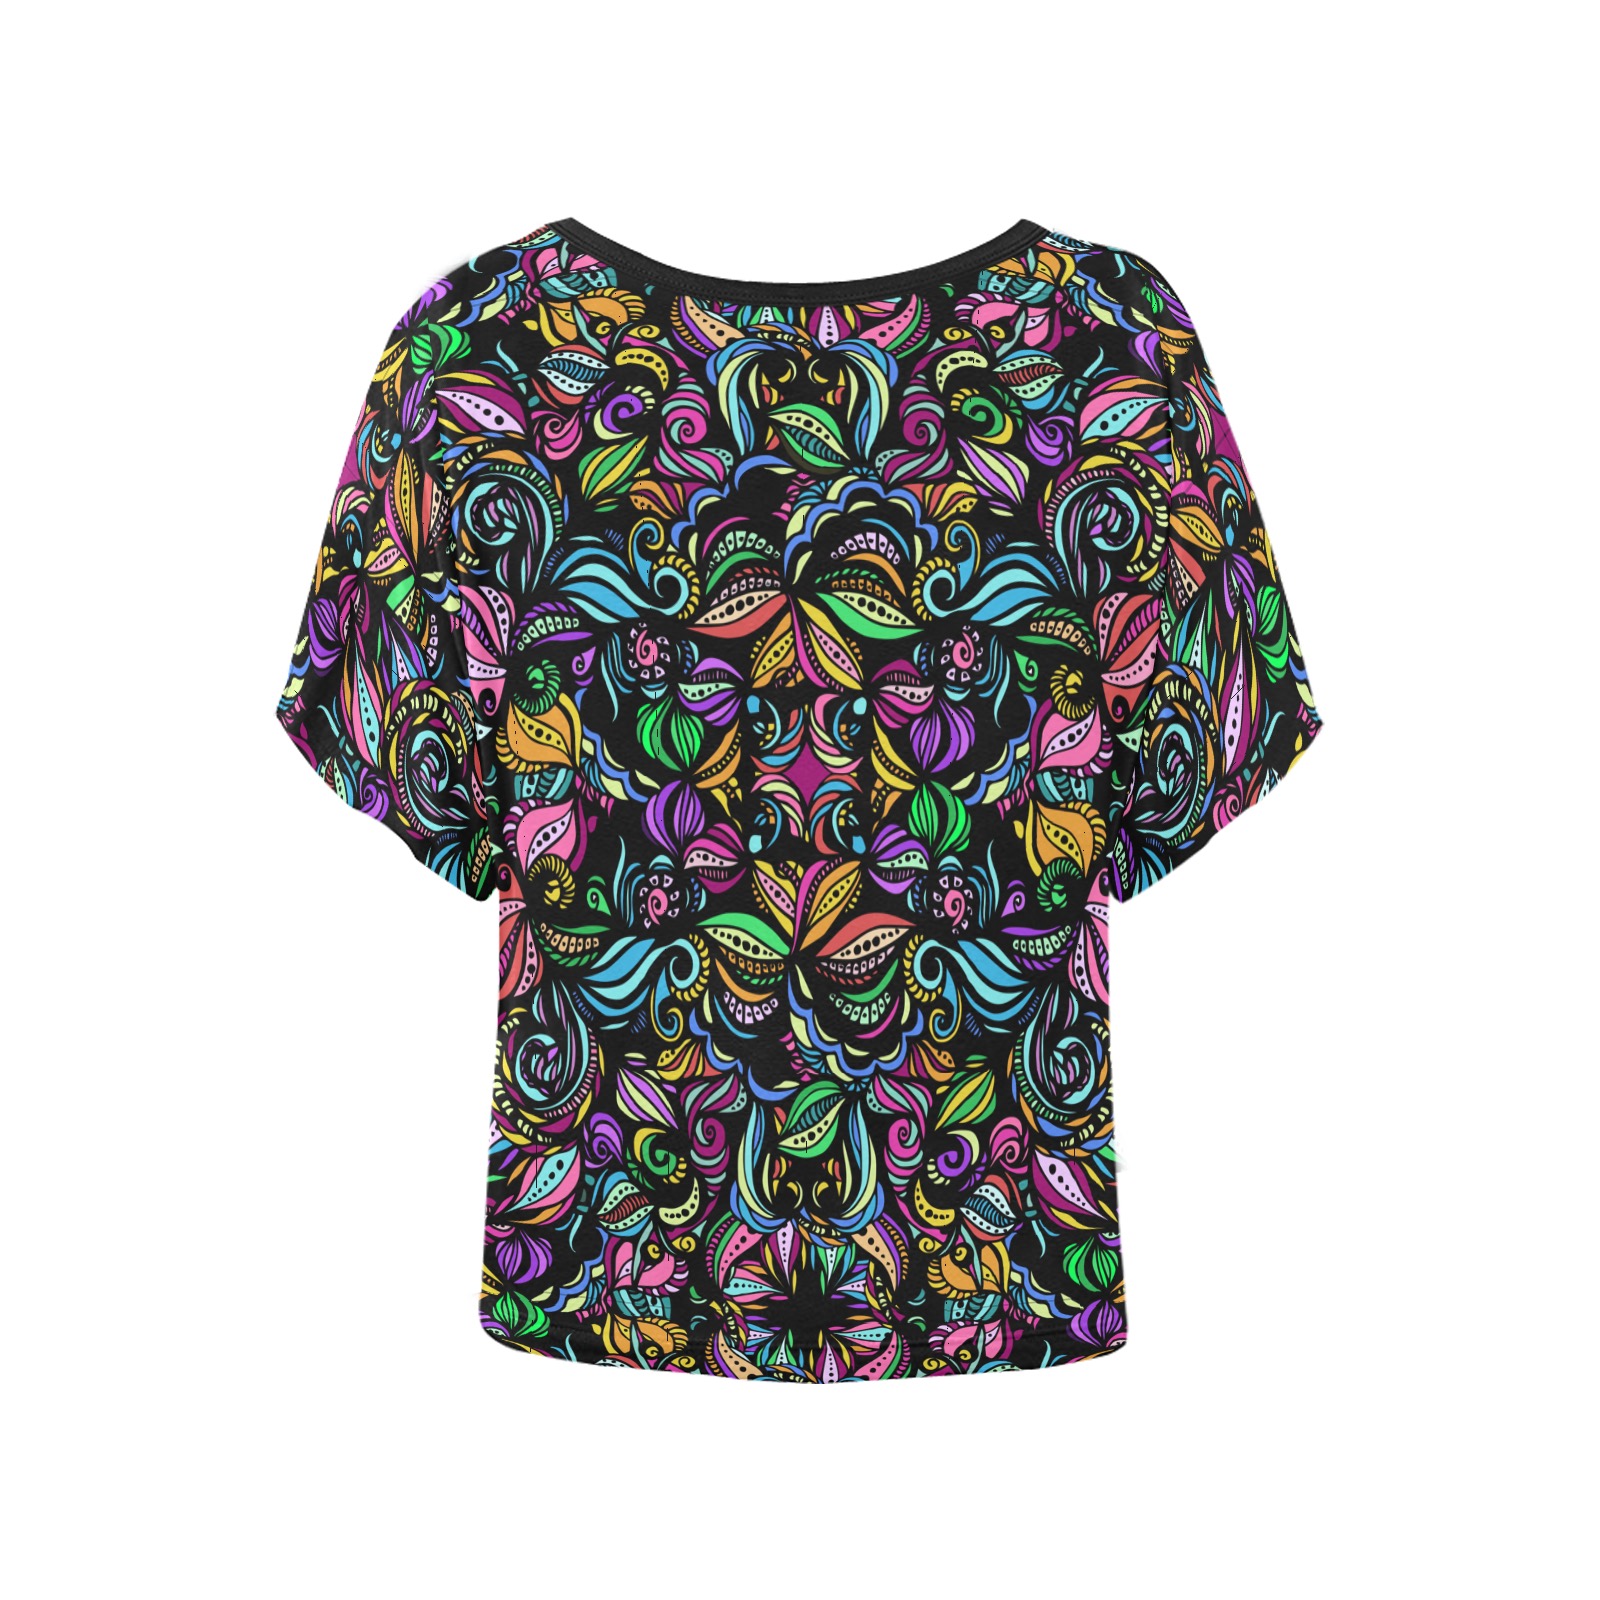 Whimsical Blooms Women's Batwing-Sleeved Blouse T shirt (Model T44)